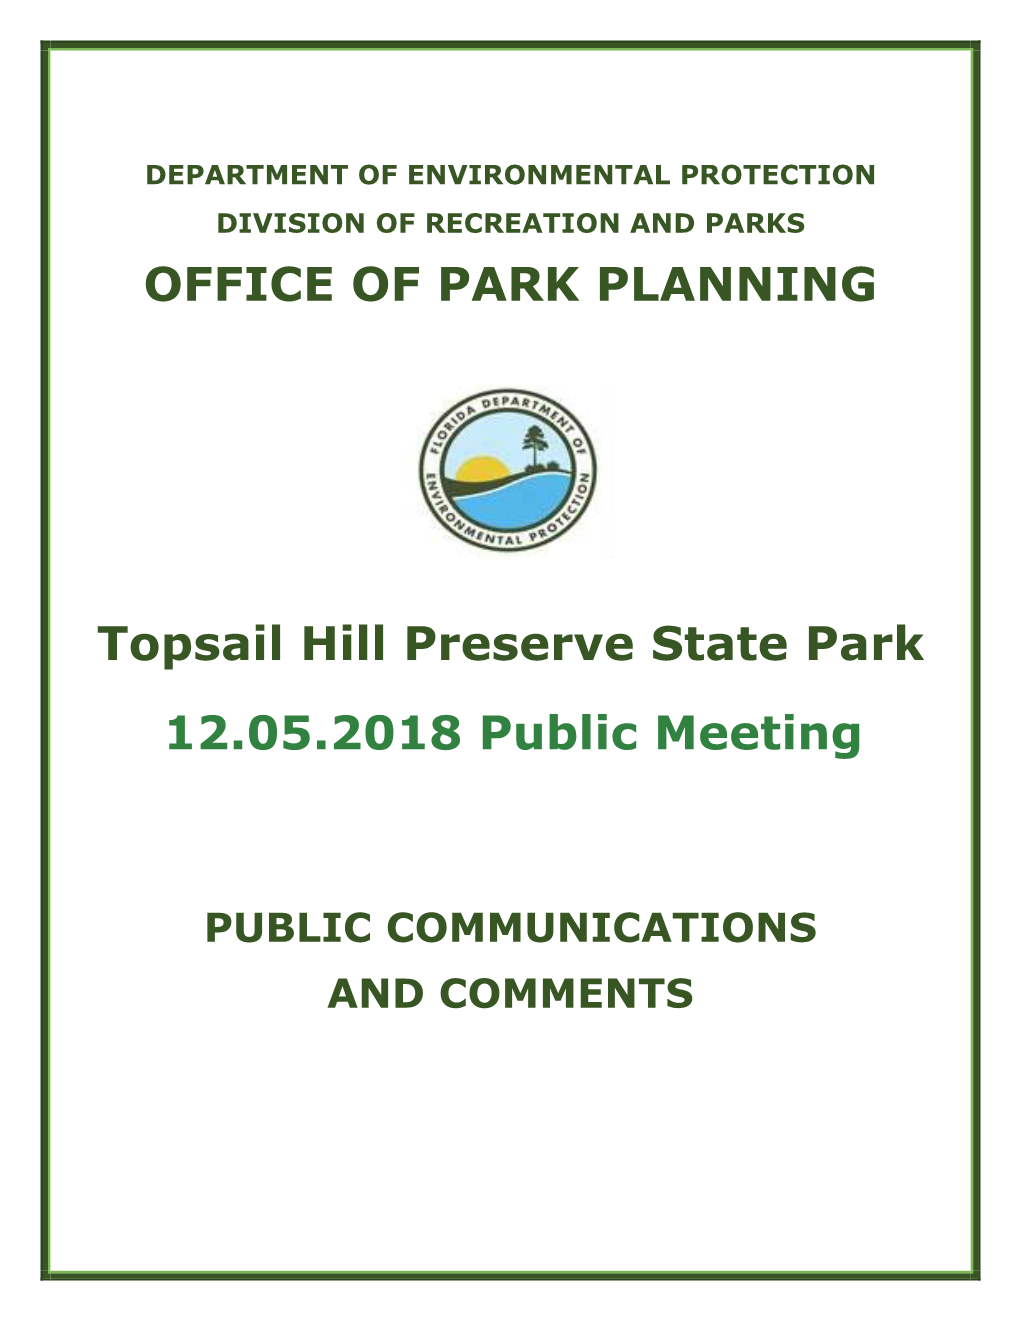 Topsail Hill Preserve State Park 12.05.2018 Public Meeting